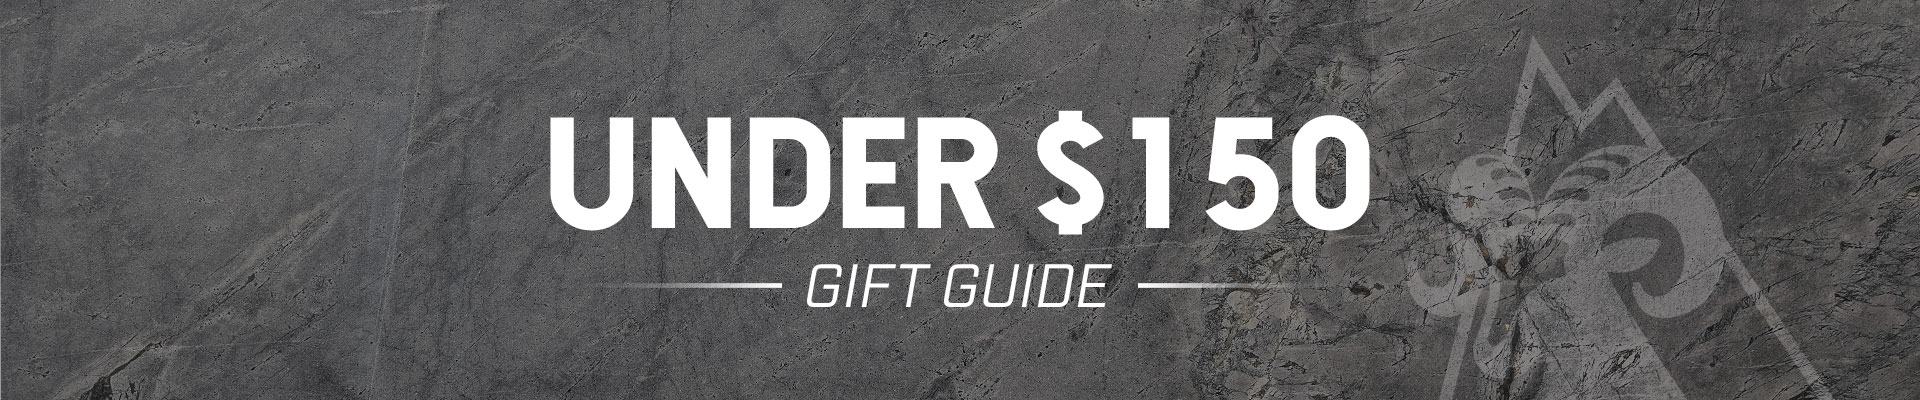 rocky gift guide for gifts under $150